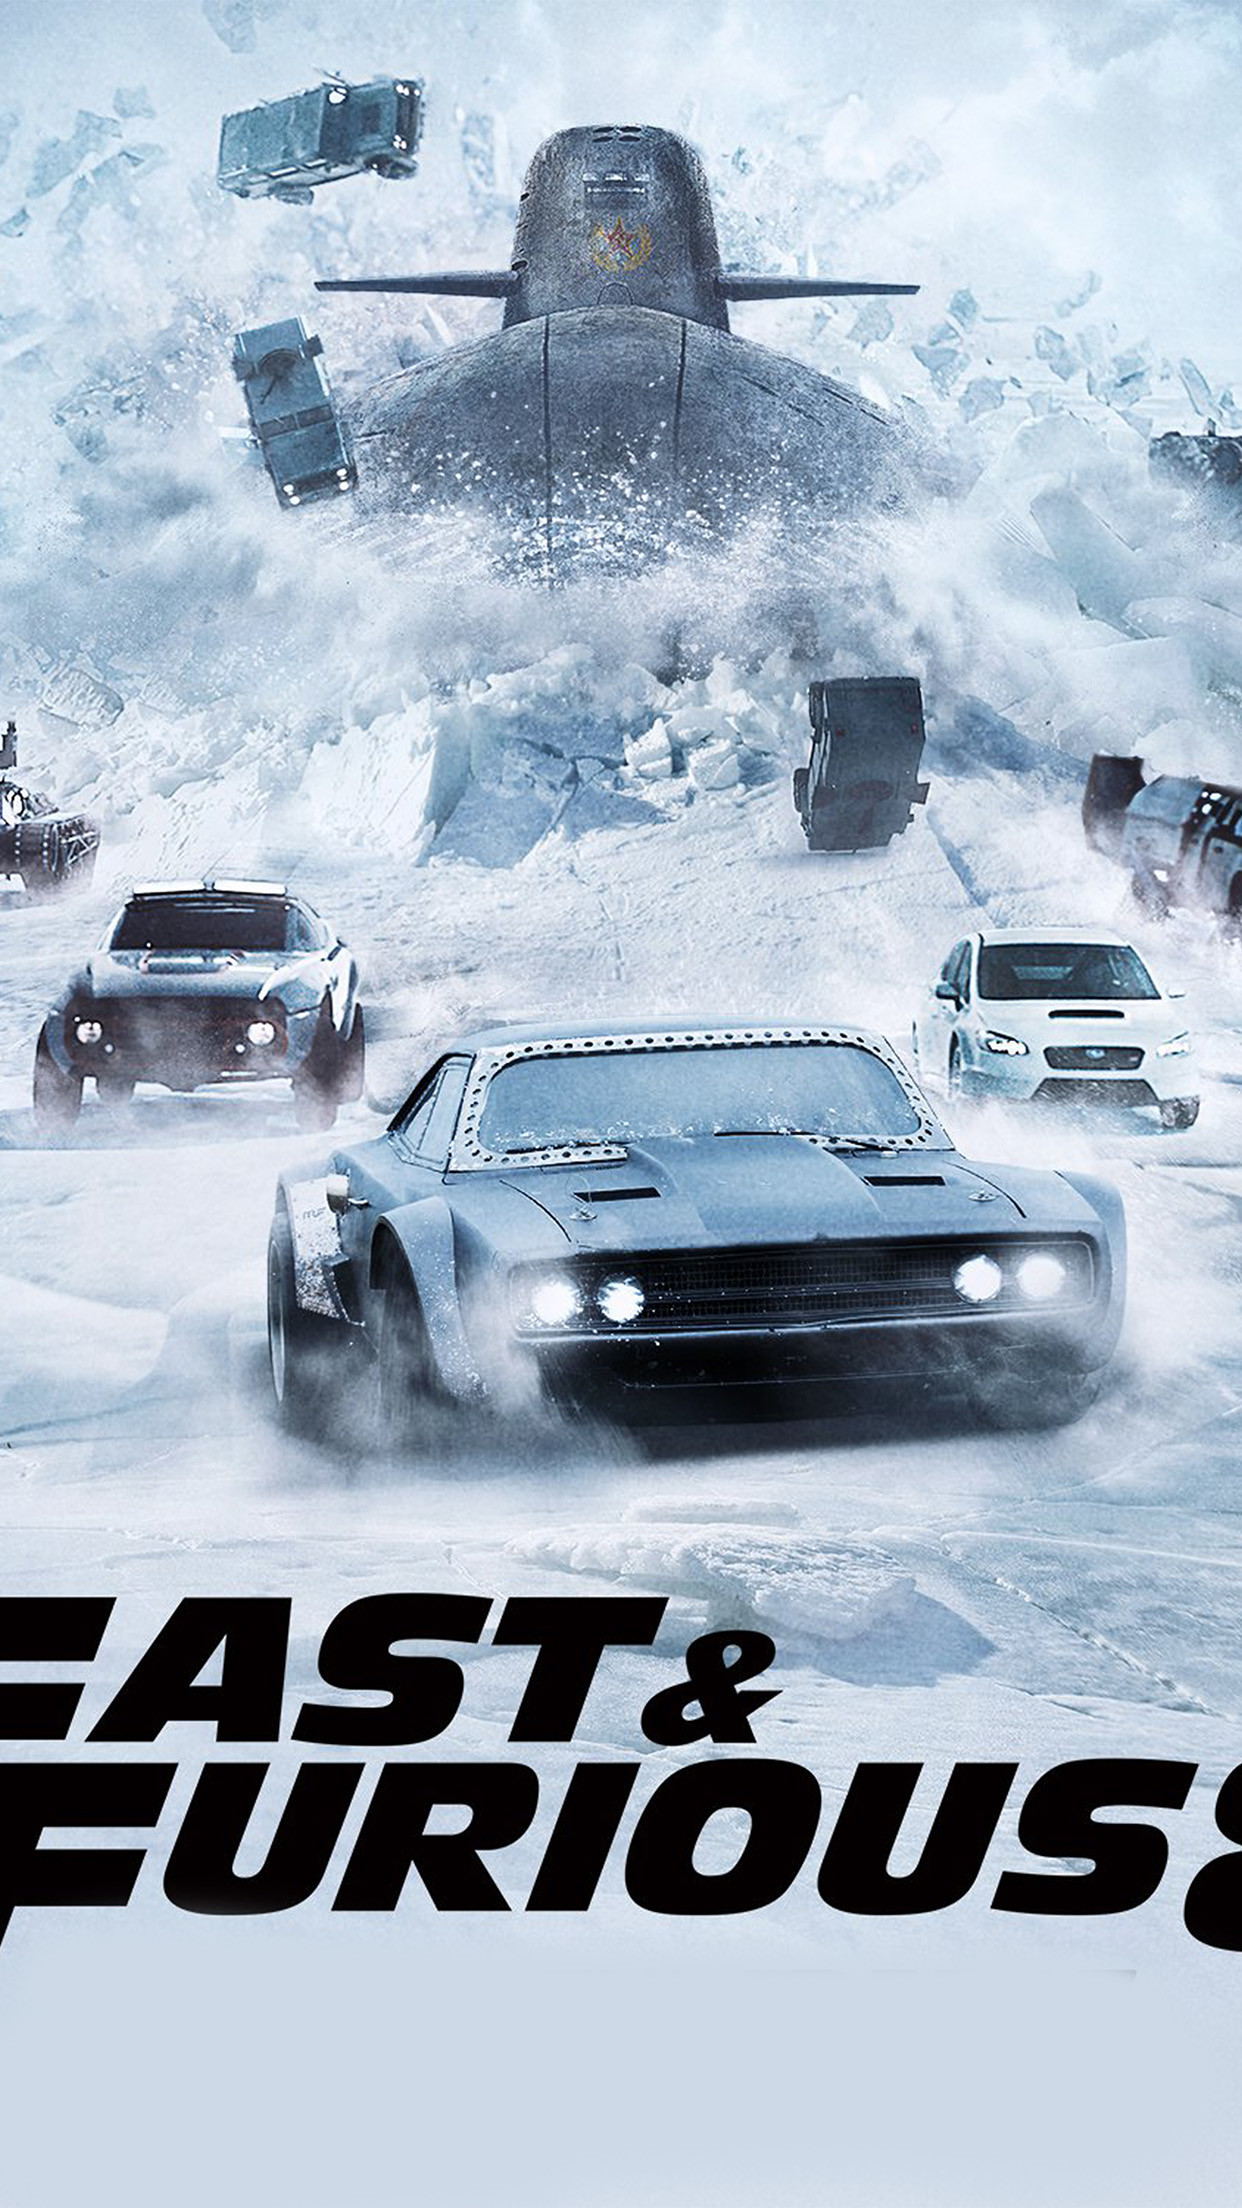 Furious 7 for windows download